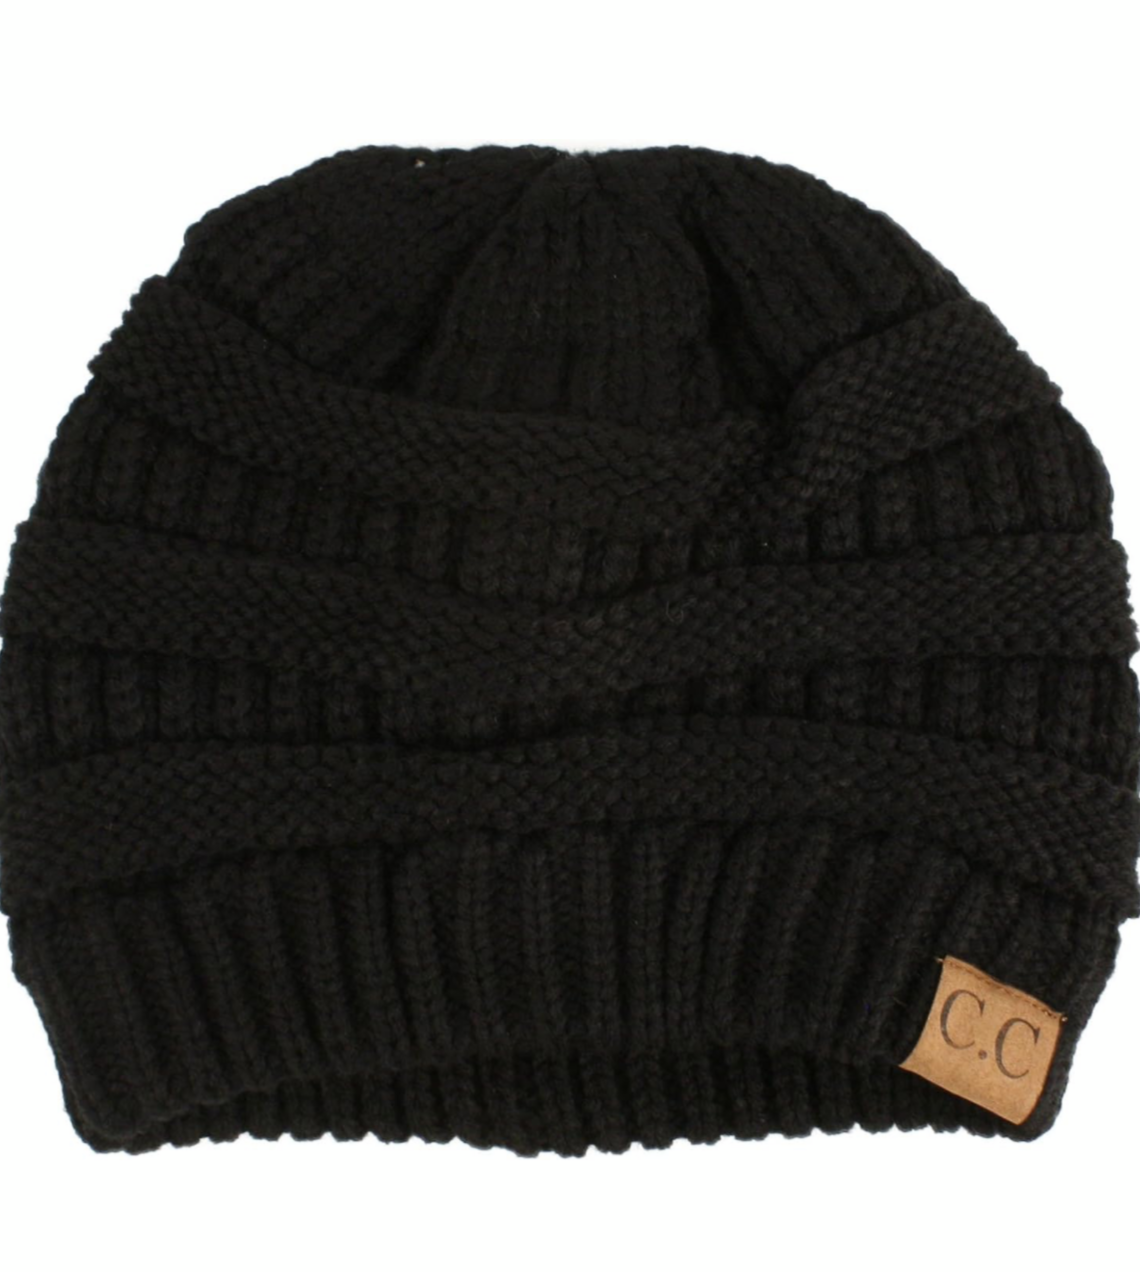 Classic CC Trendy Chunky Stretchy Cable Knit Beanie Hat